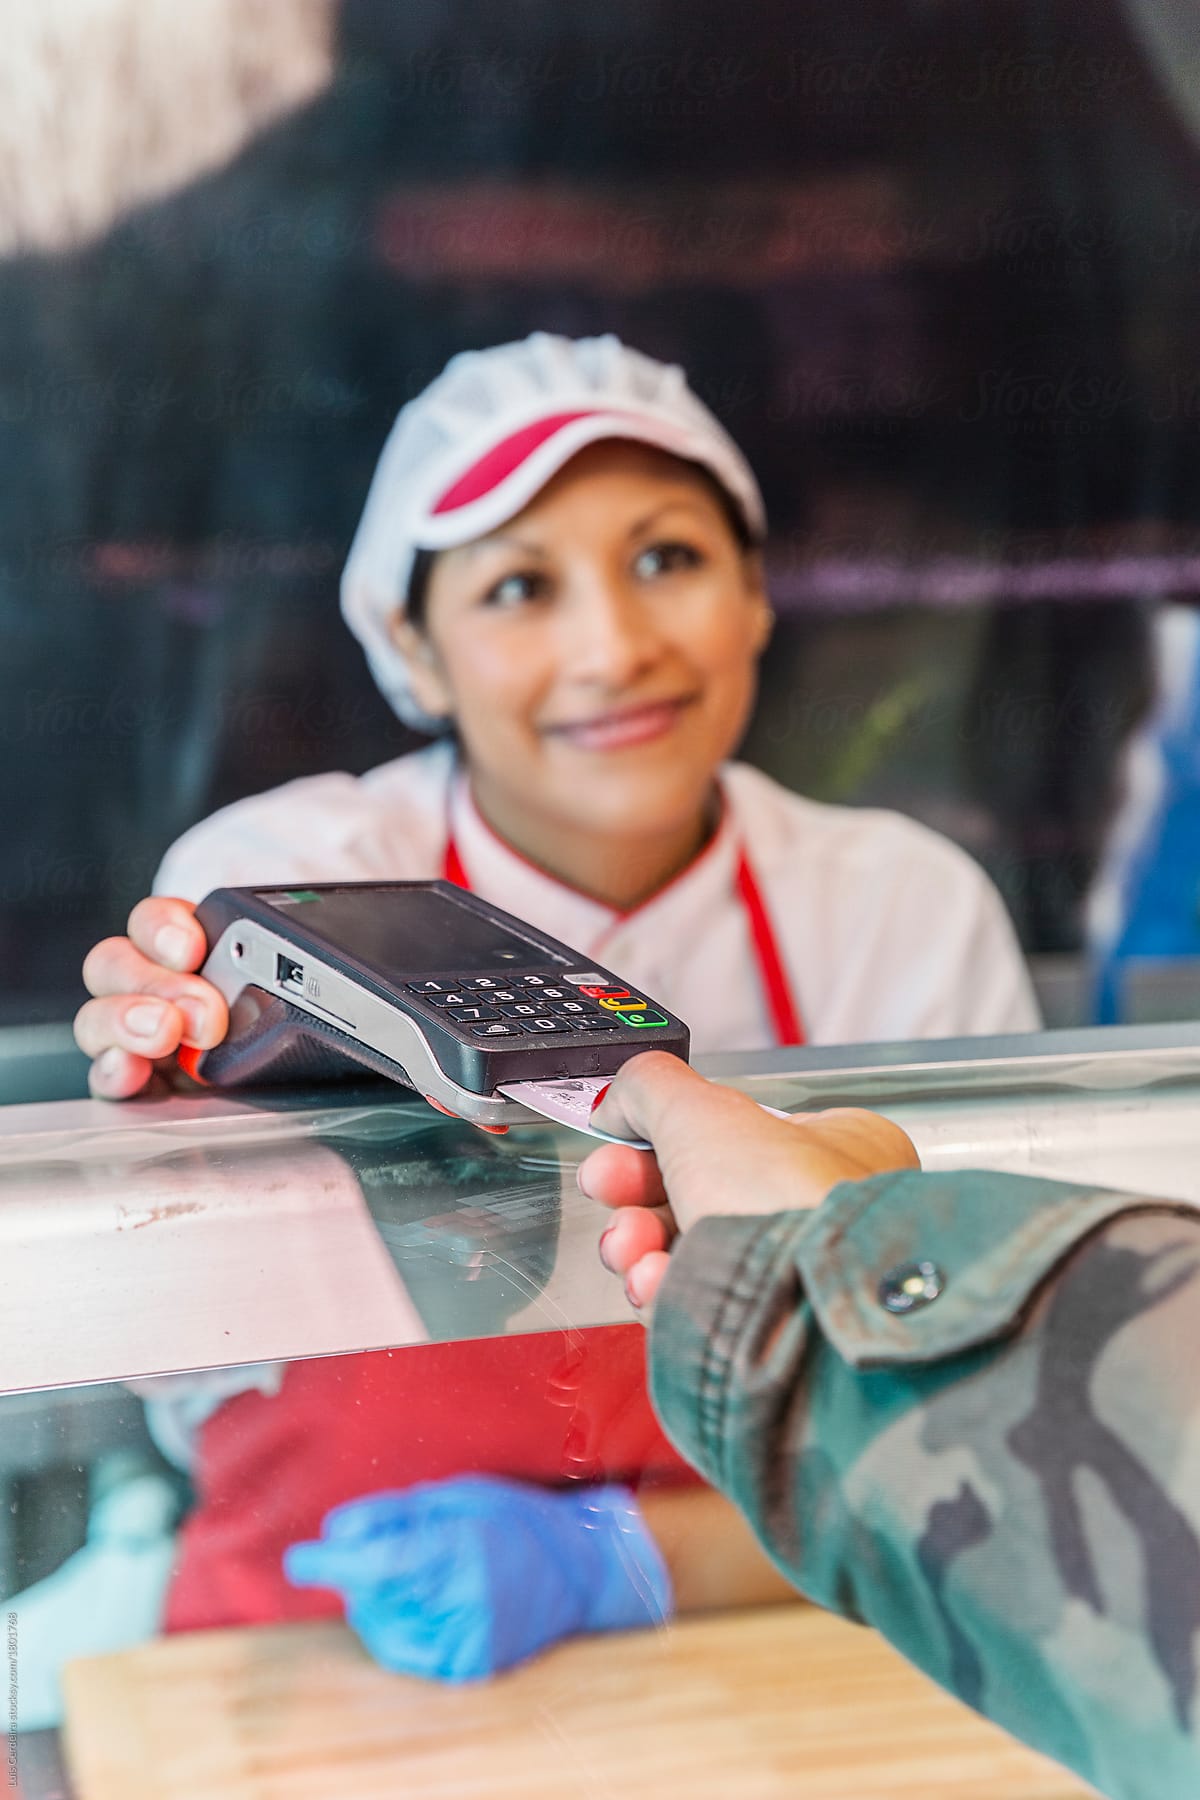 A woman paying a bill with a credit card on a butcher shop